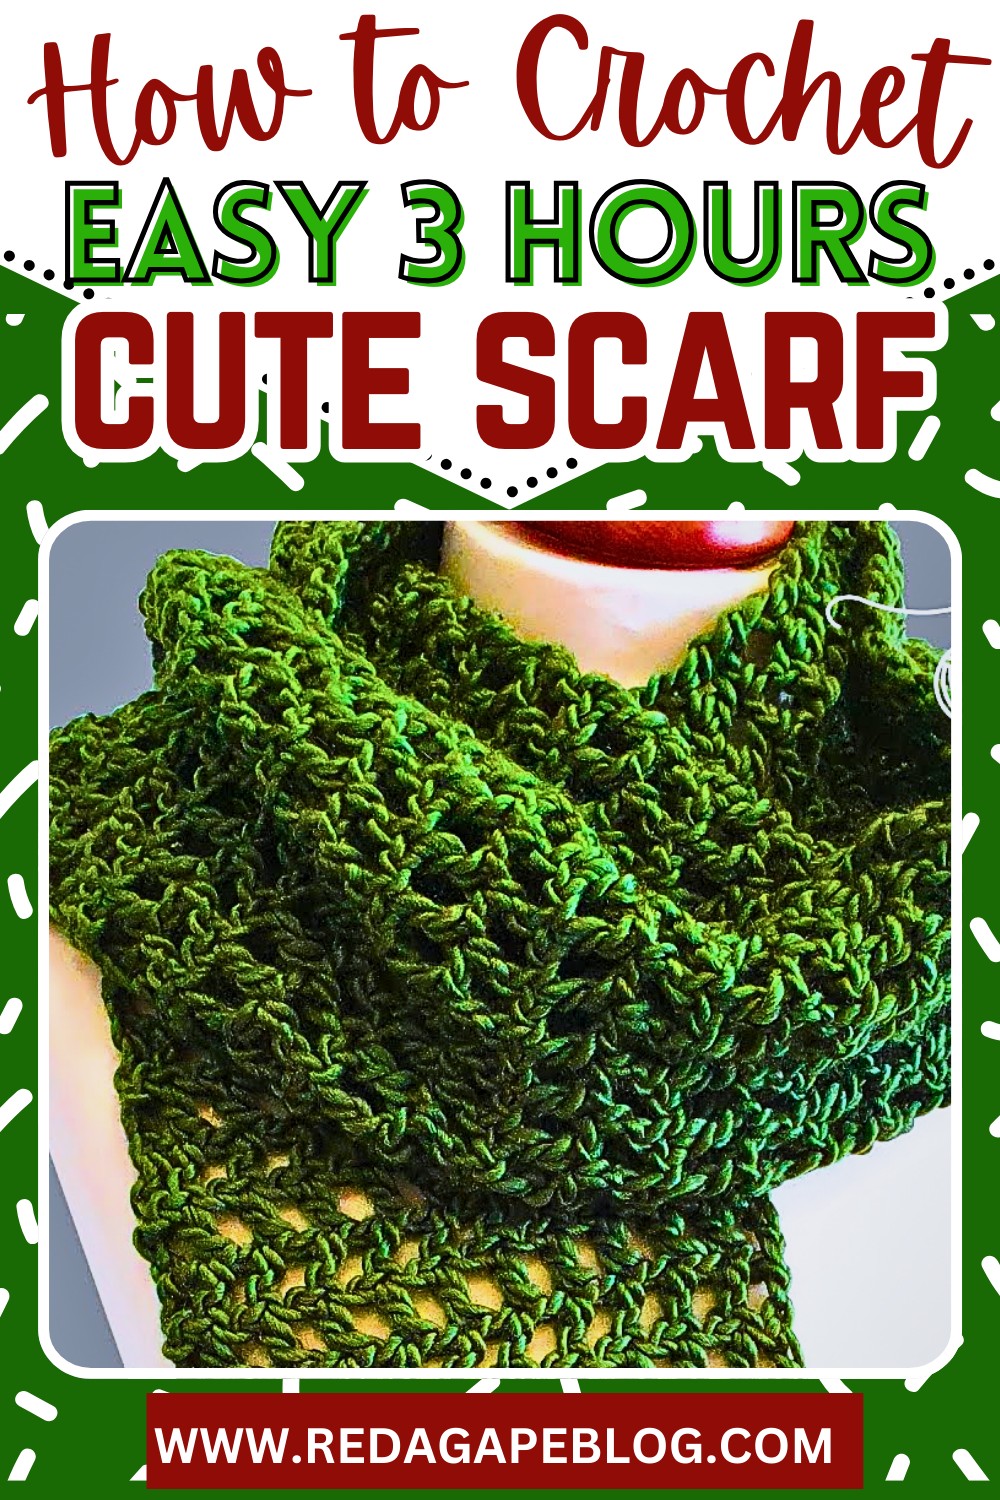 Crochet A Scarf In Under 3 Hours